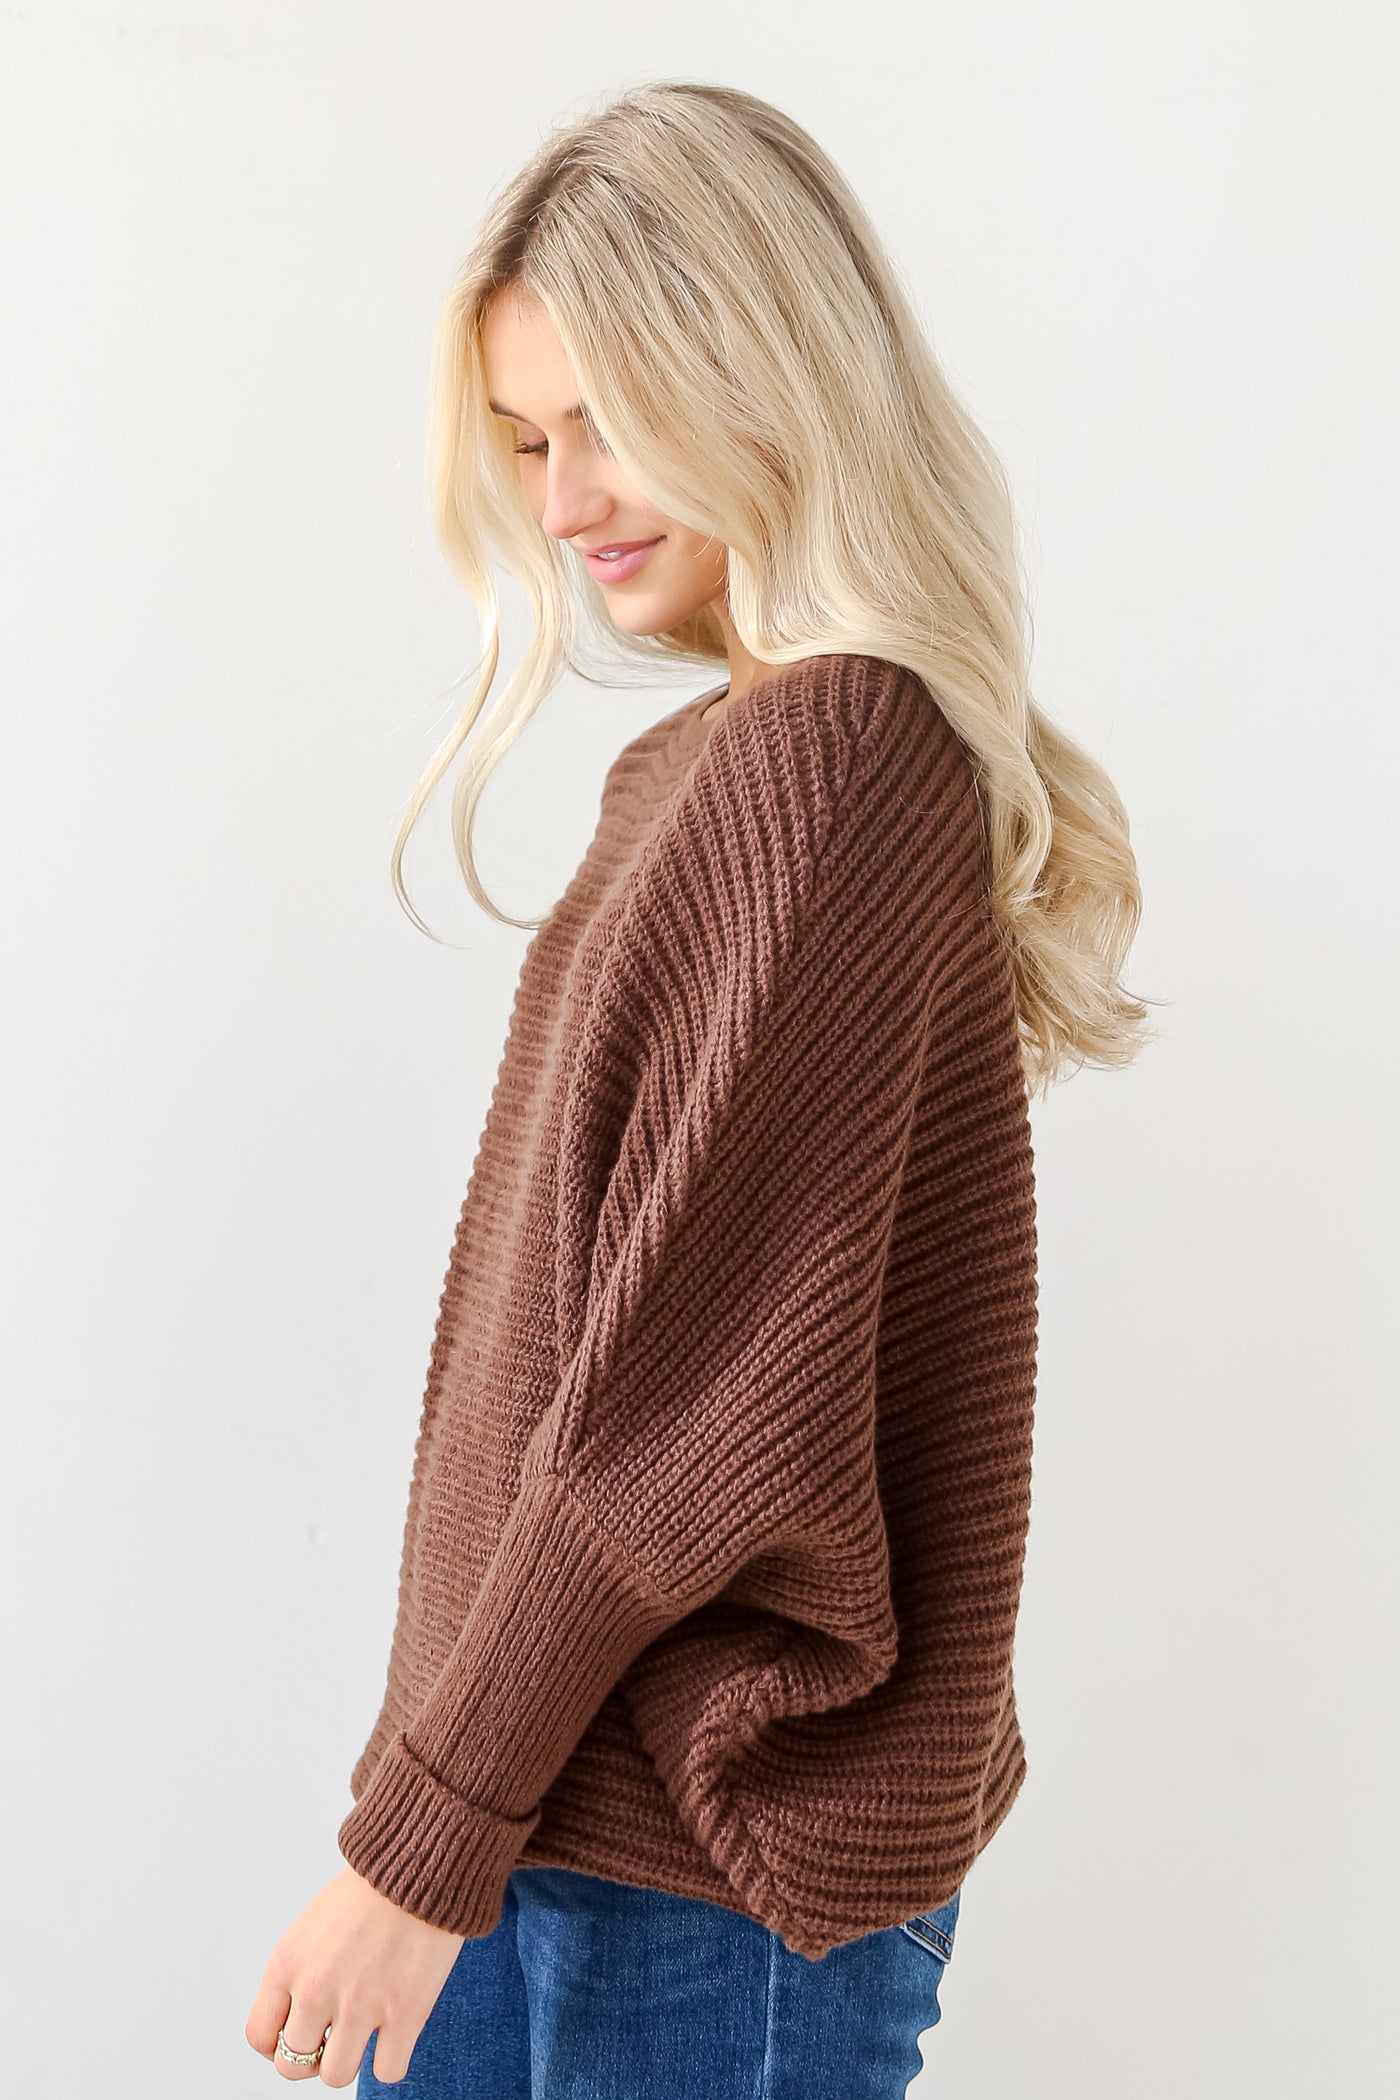 brown Oversized Sweater side view